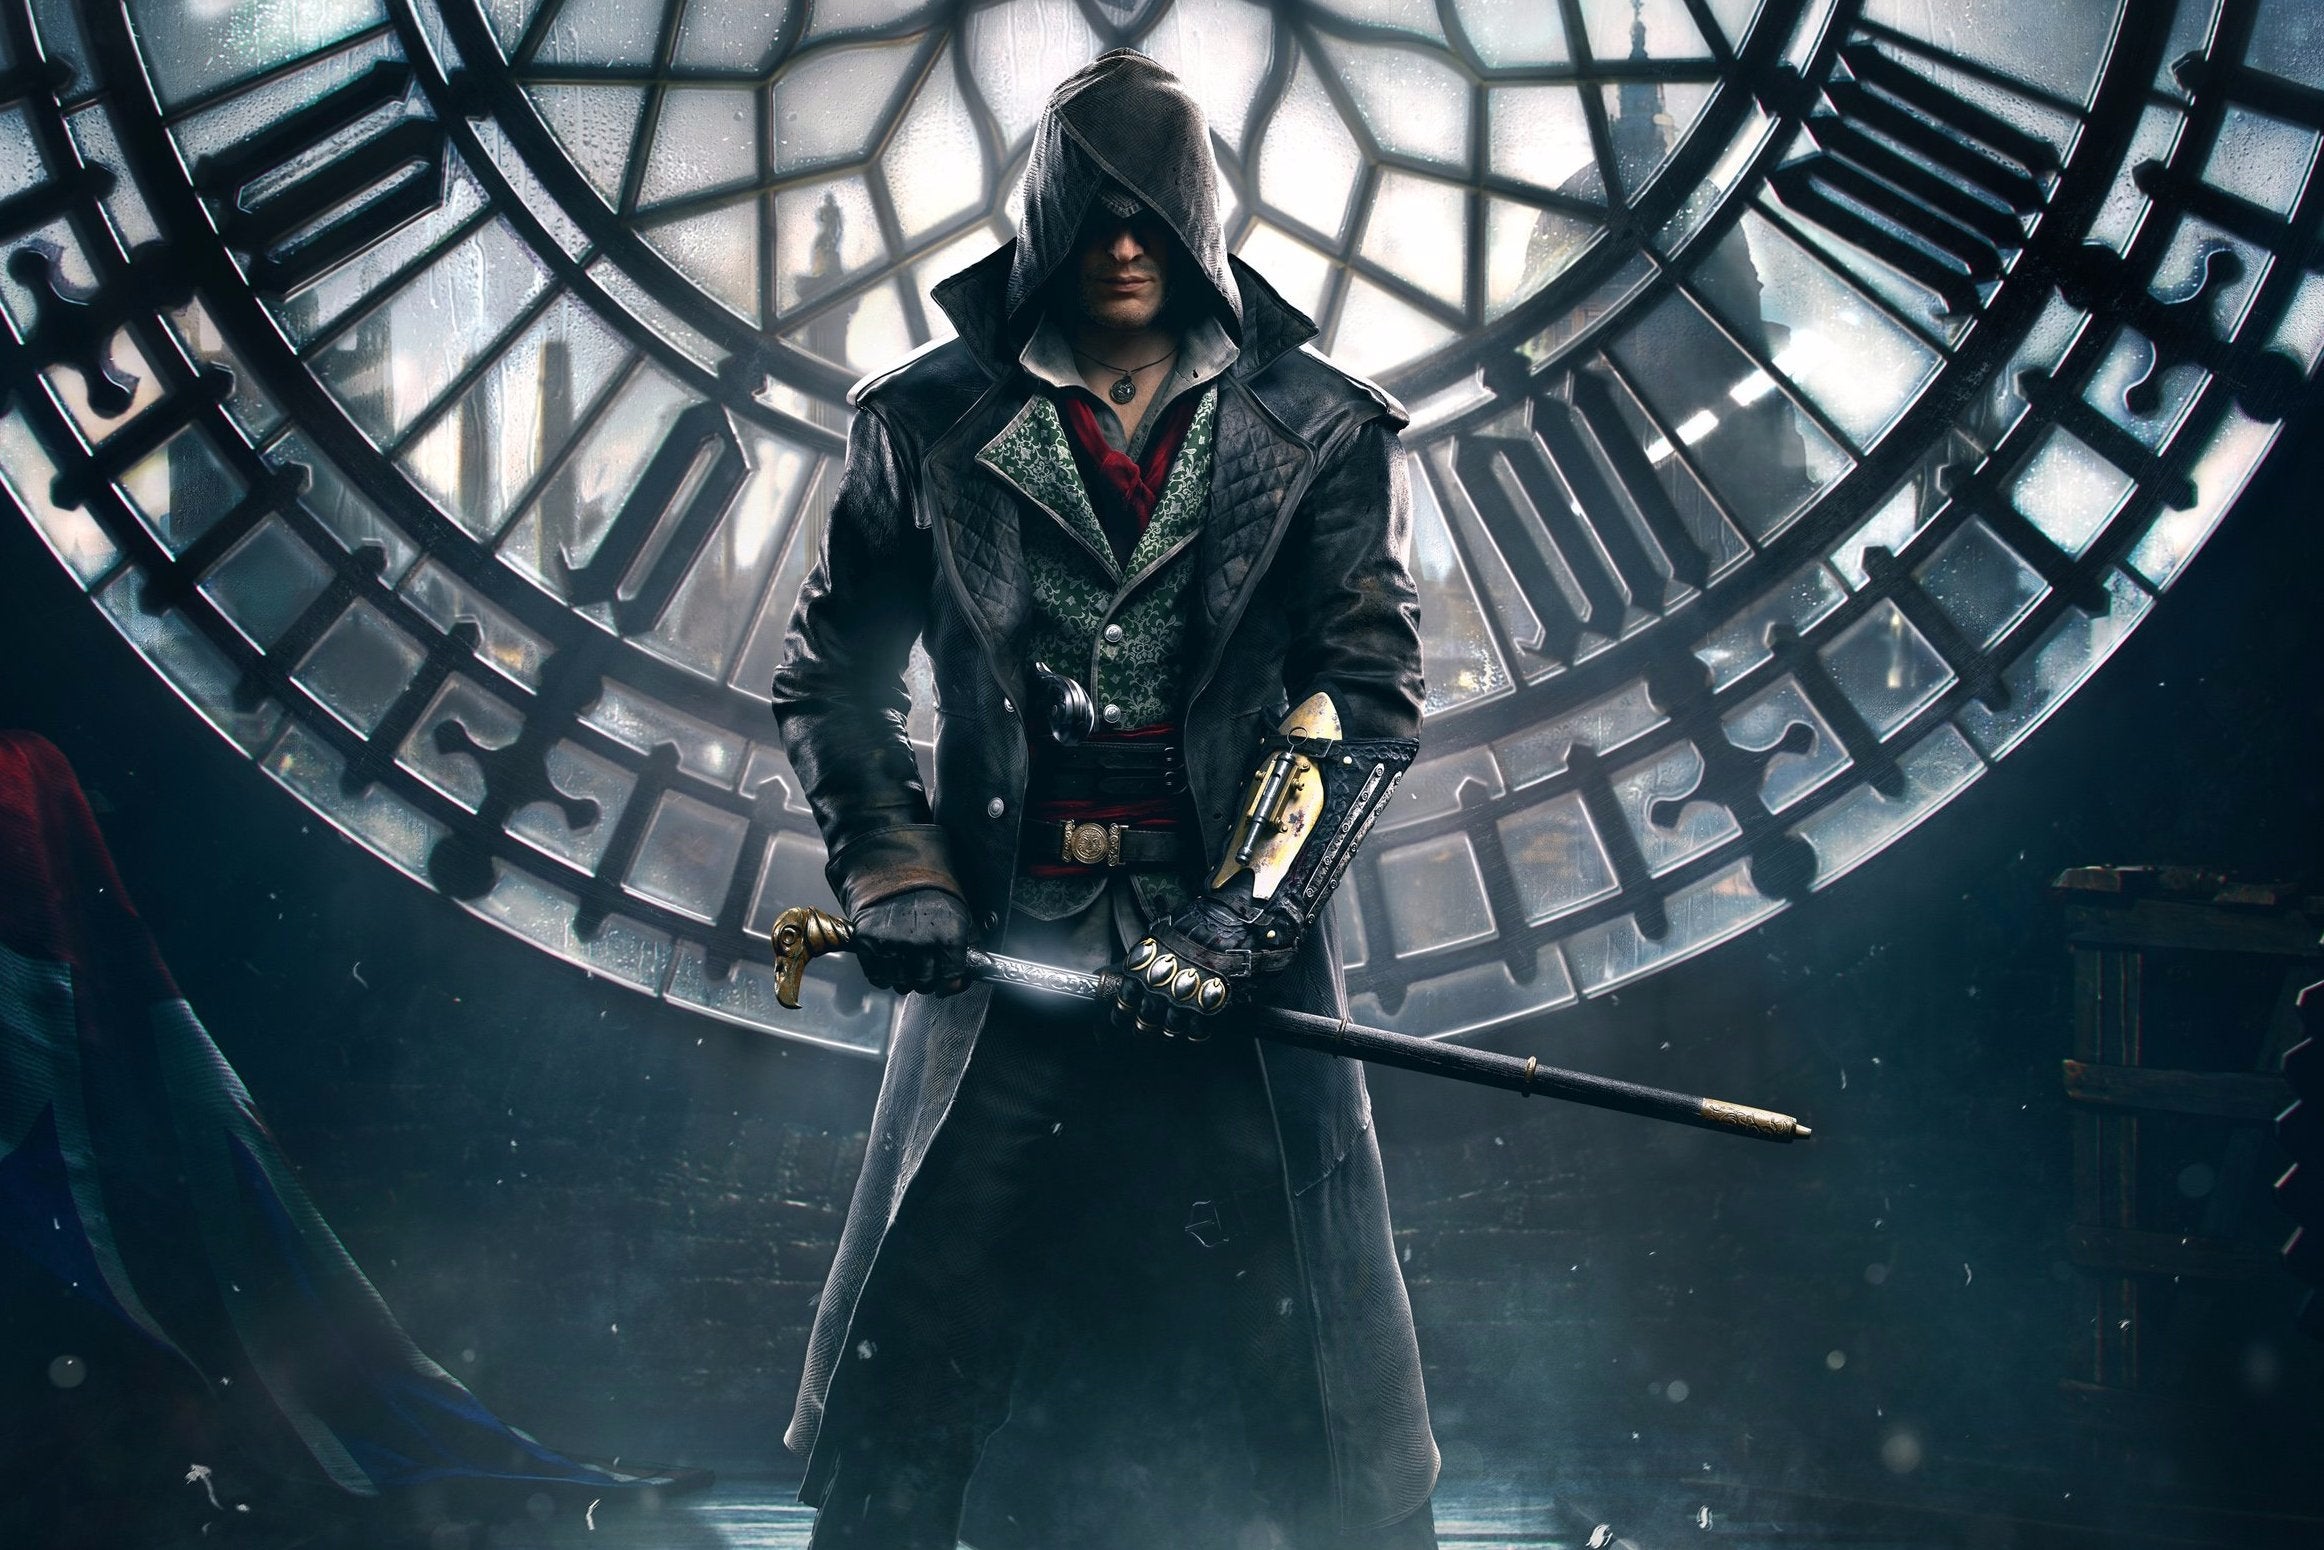 Image for No new Assassin's Creed this year, Ubisoft confirms